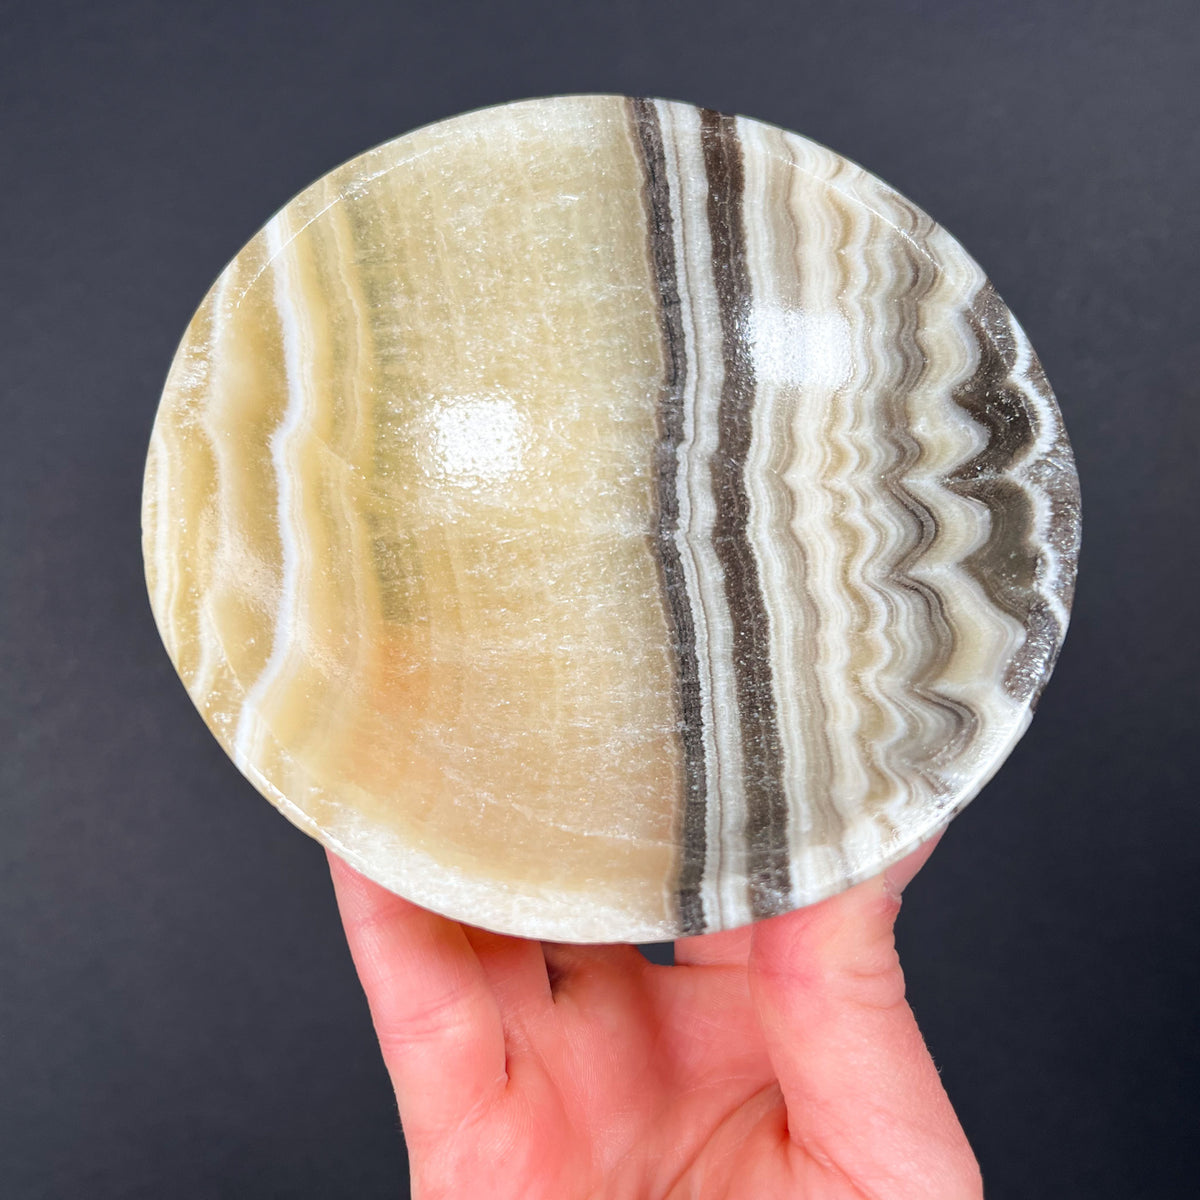 Zebra and Golden Calcite Stone Dish from Mexico